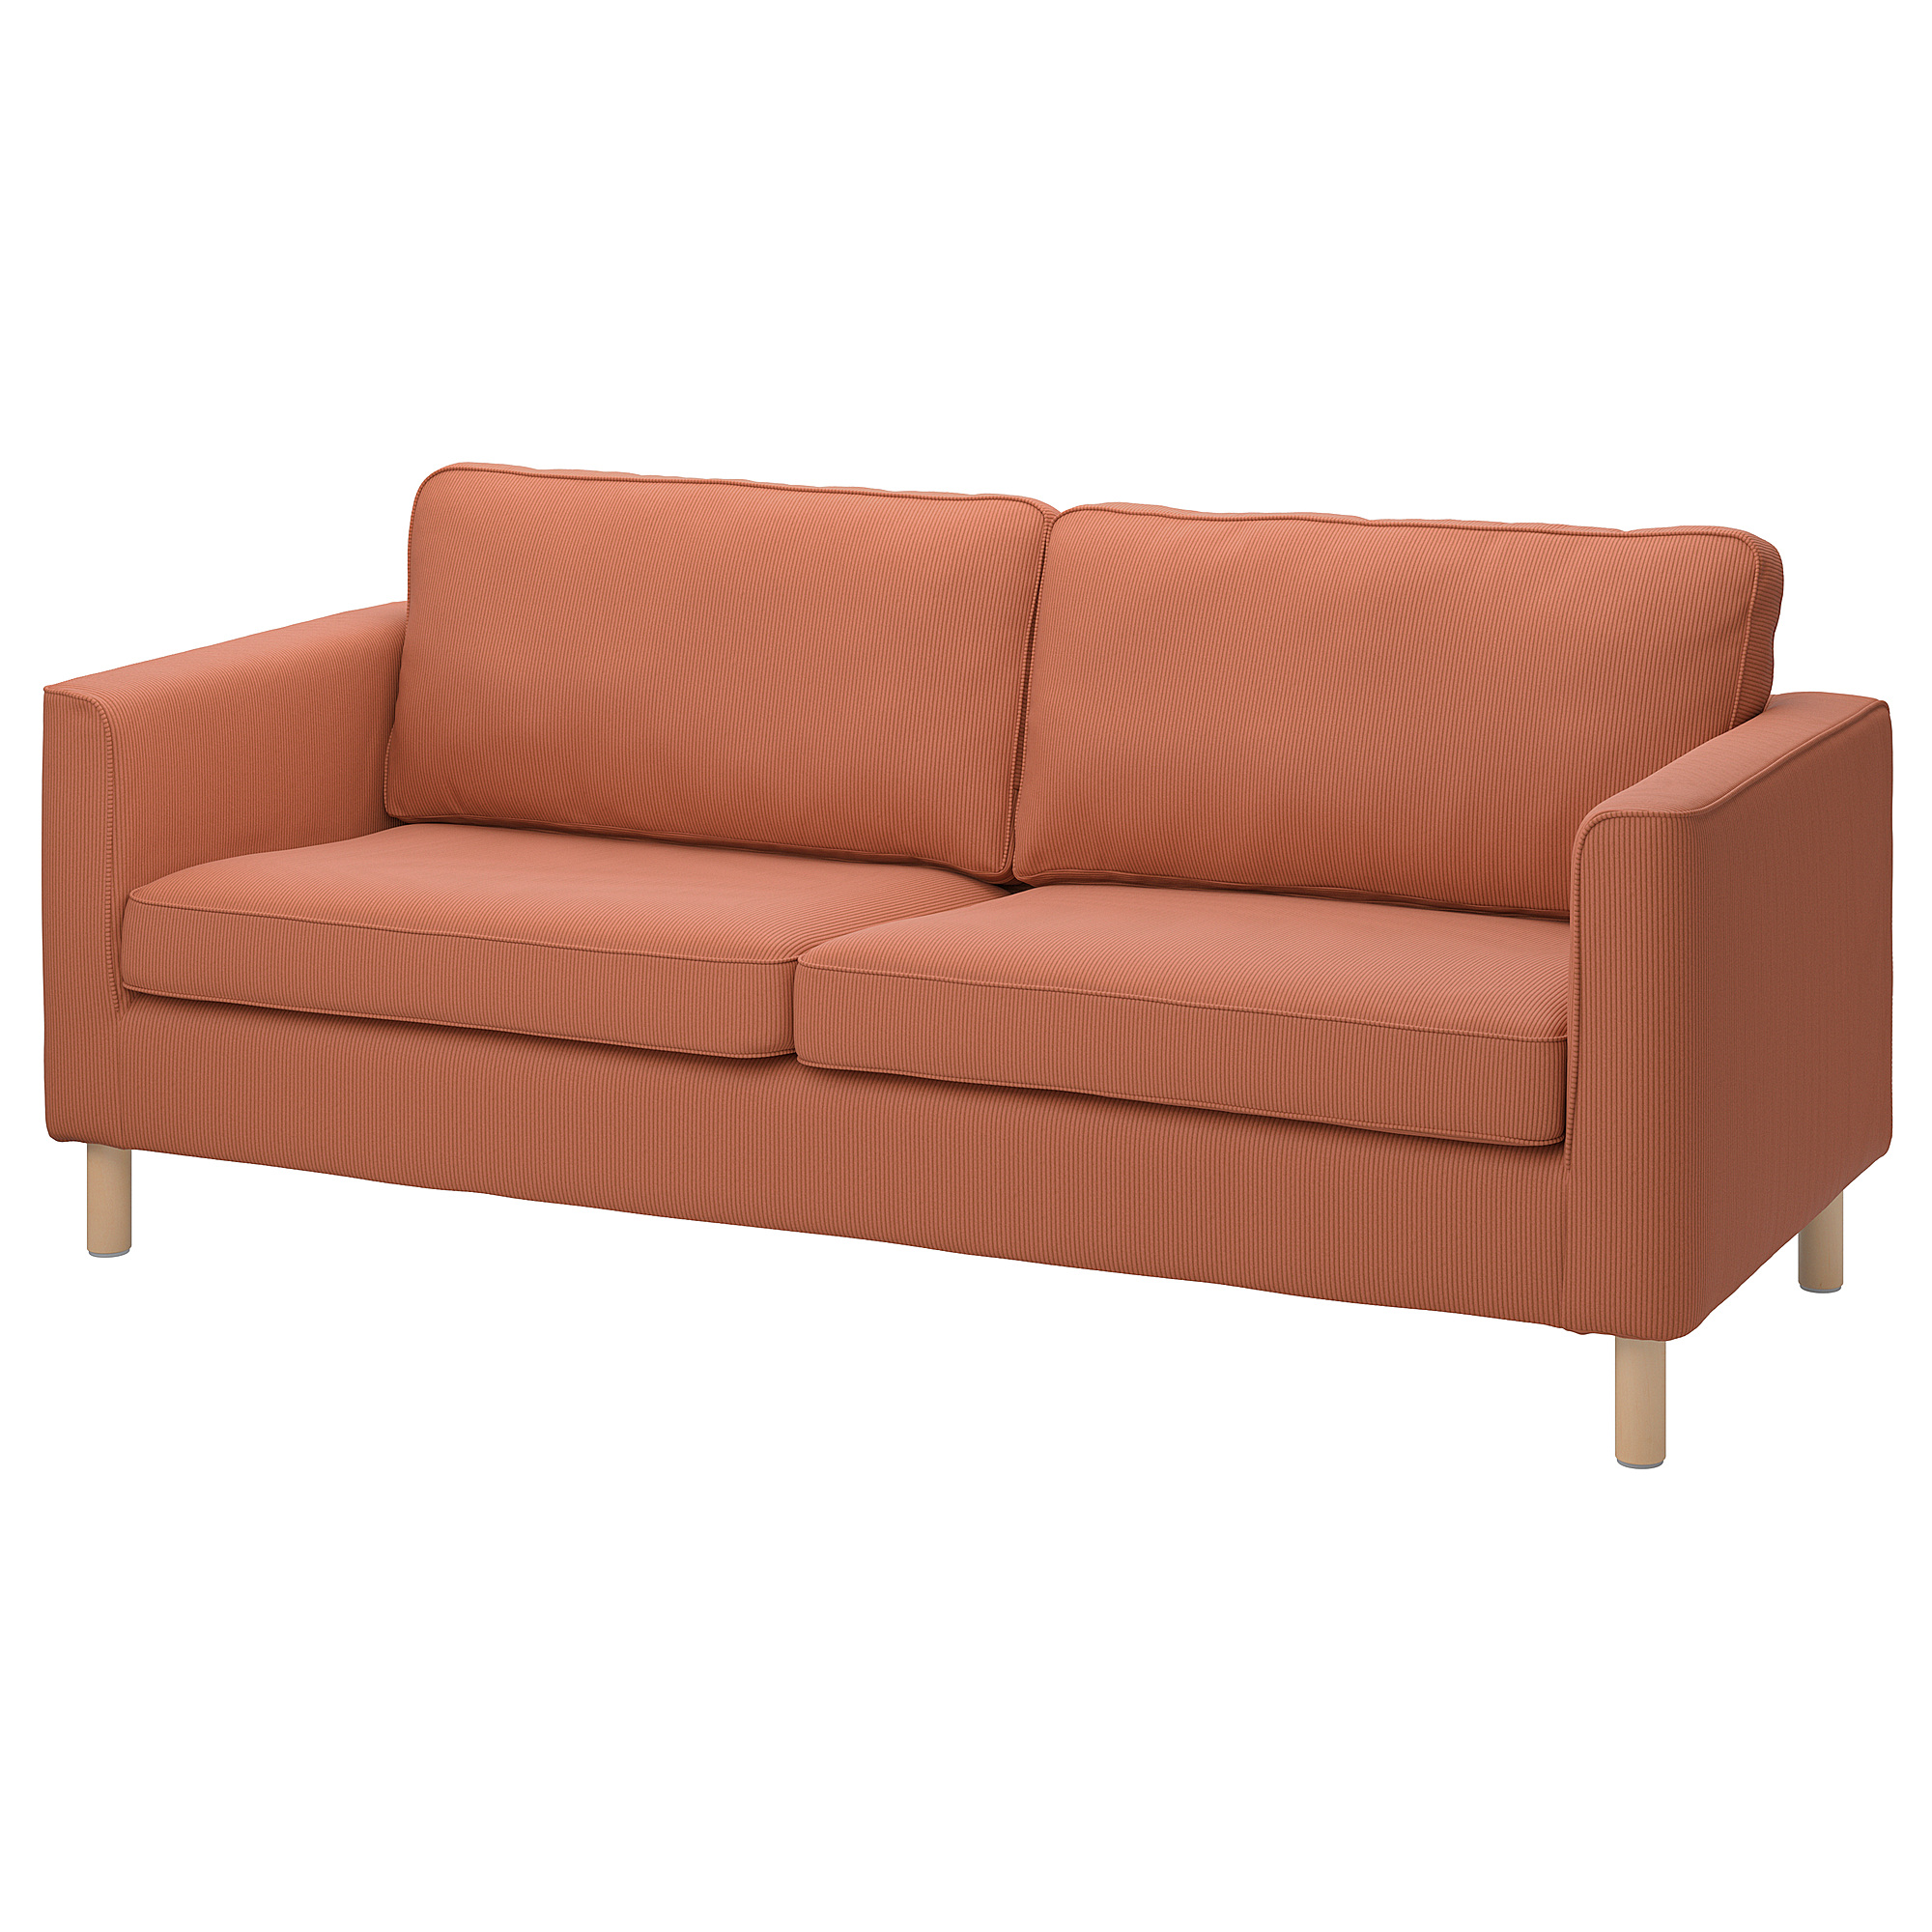 PÄRUP cover for 3-seat sofa